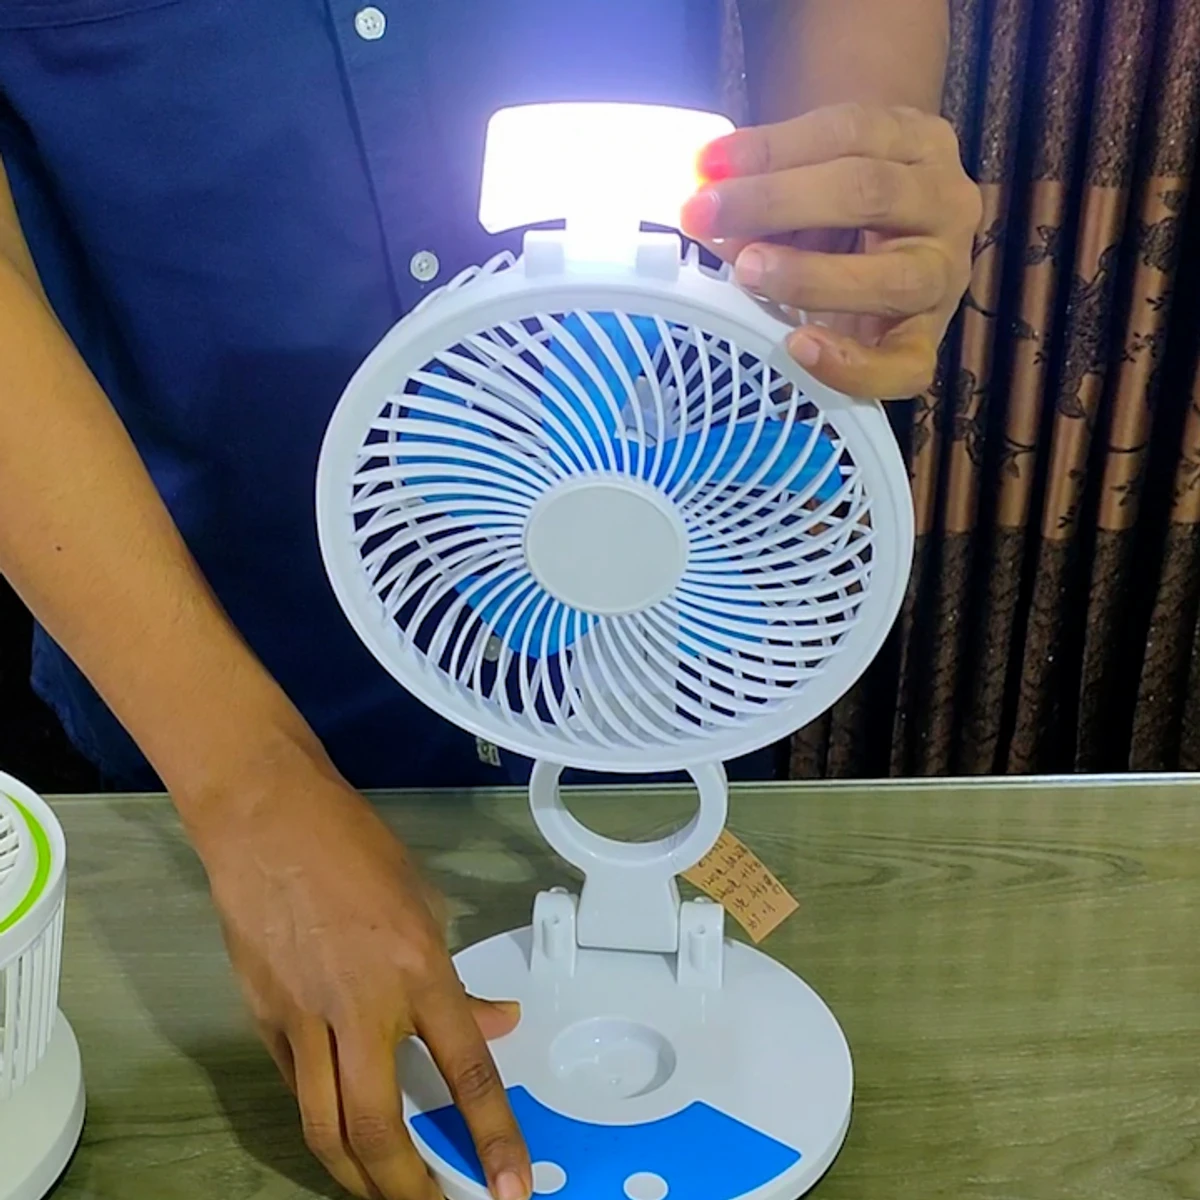 RECHARGEABLE TABLE FAN WITH LED LIGHT